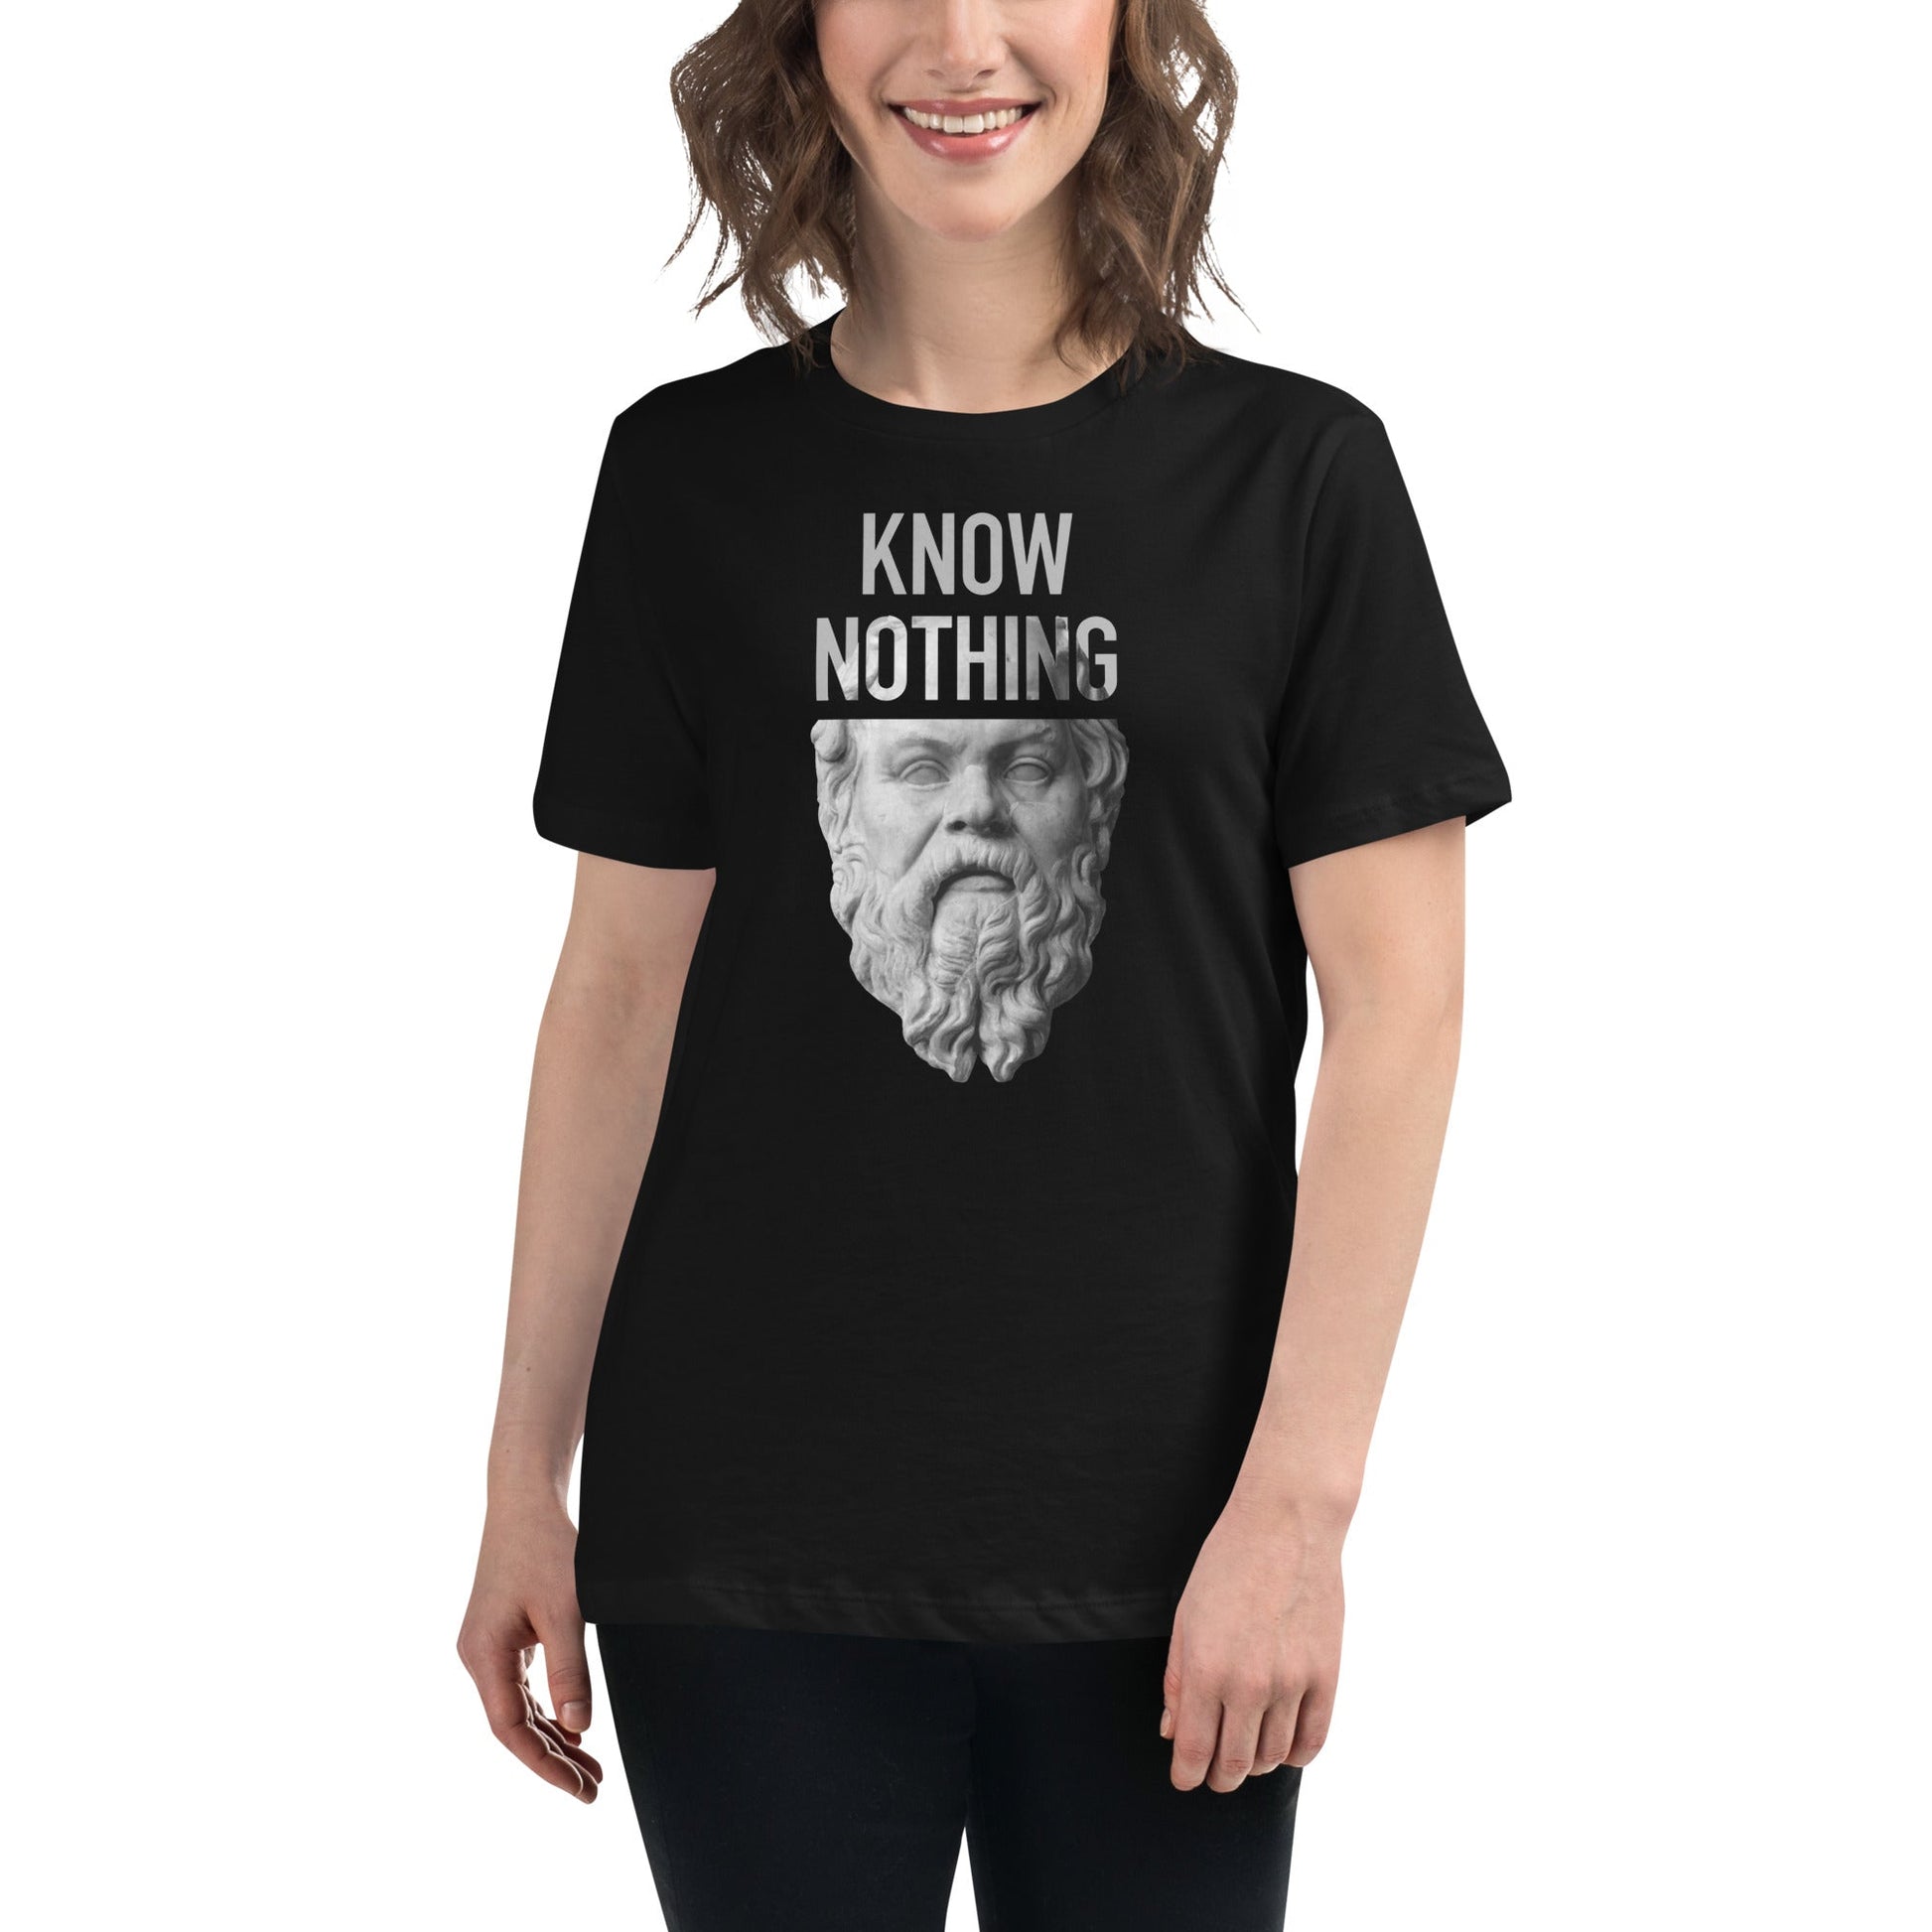 Socrates - Know Nothing - Women's T-Shirt